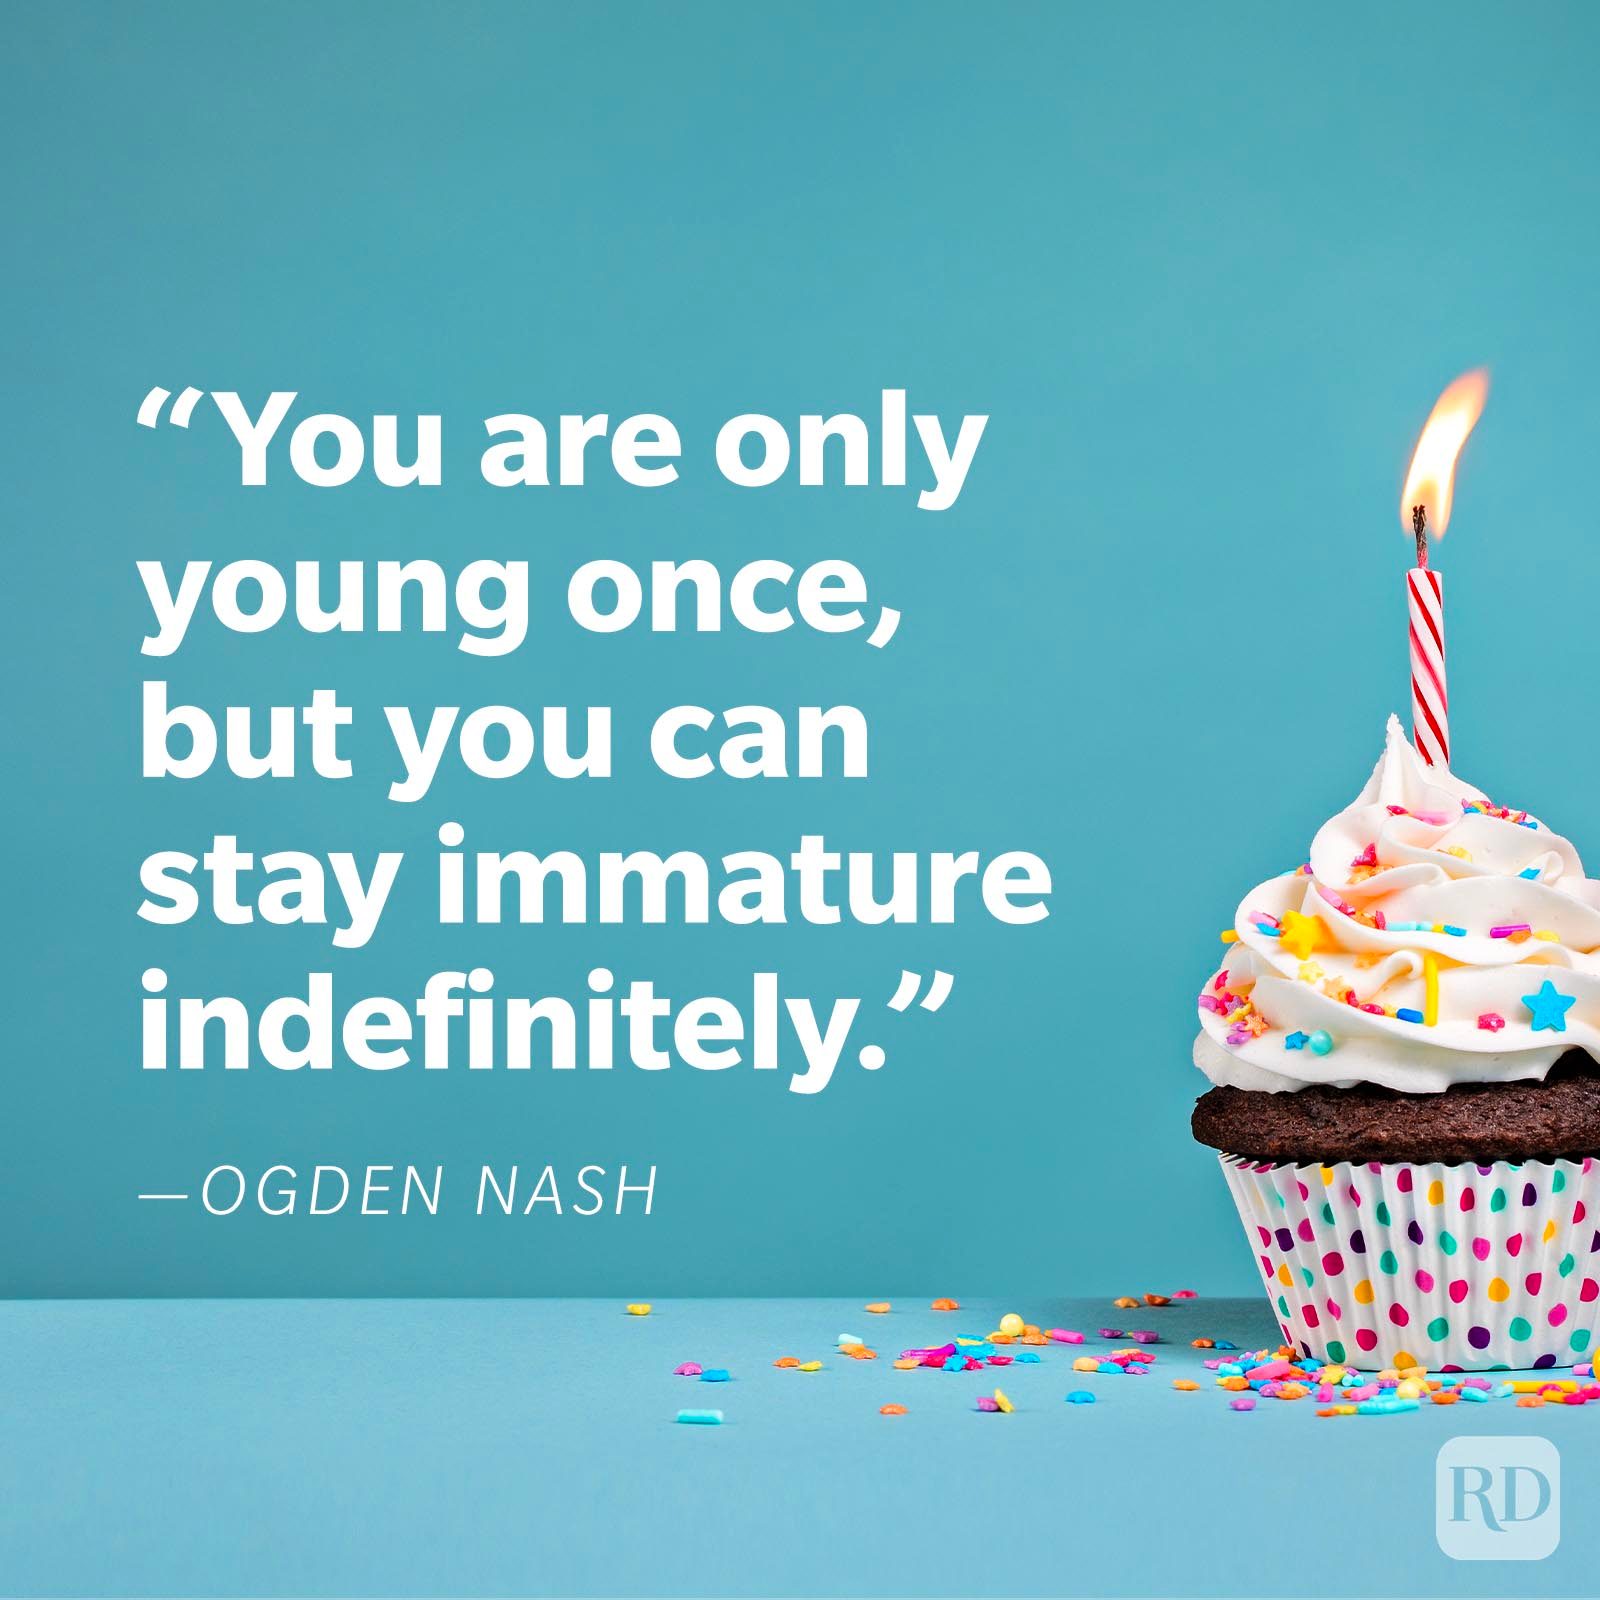 funny my 21st birthday quotes